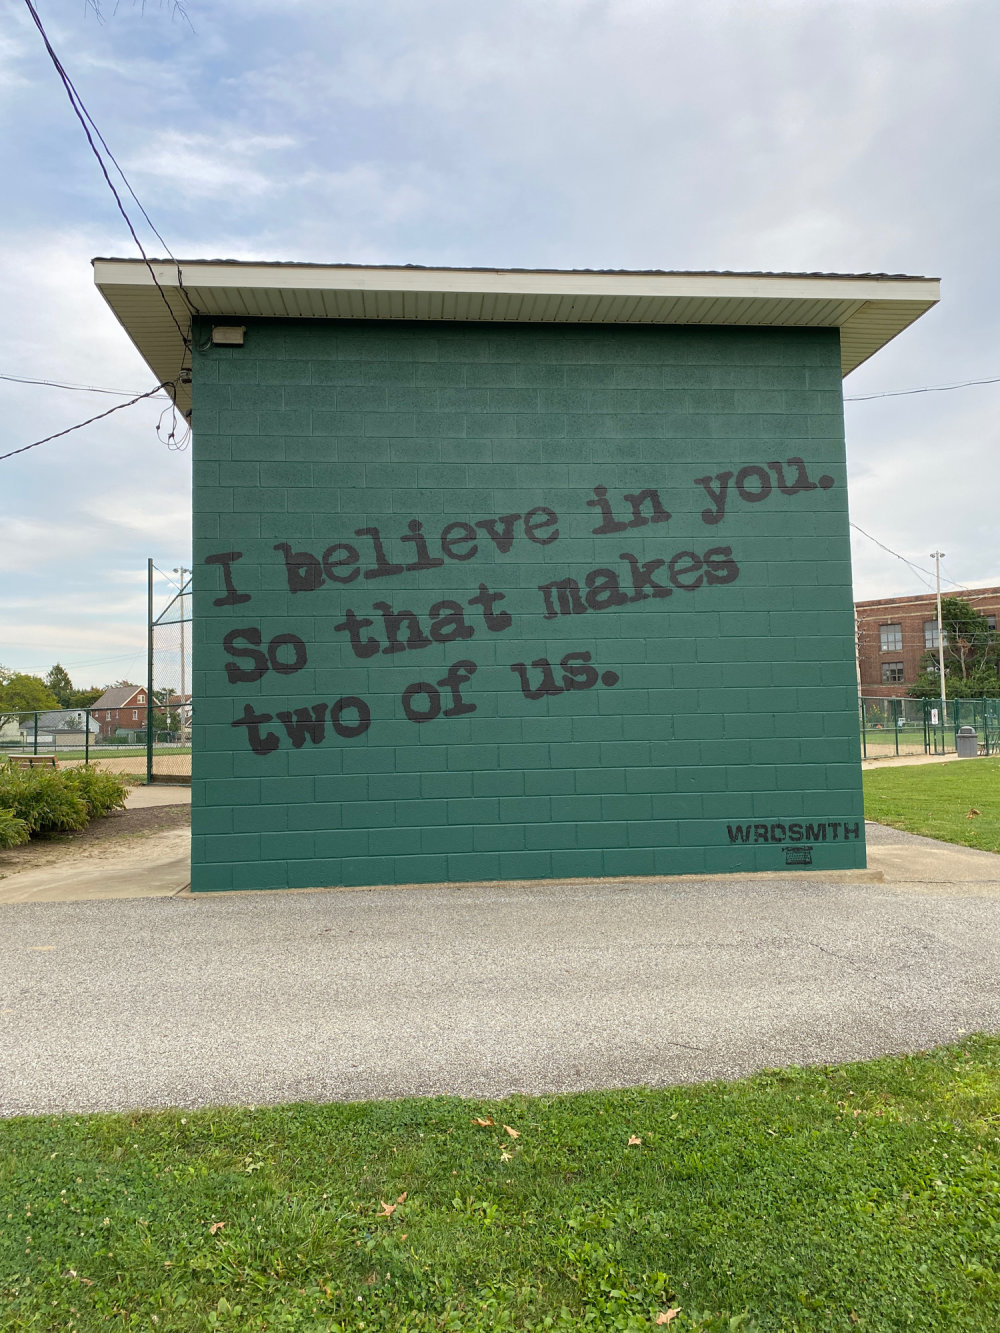 mural in Lakewood by artist WRDSMTH.